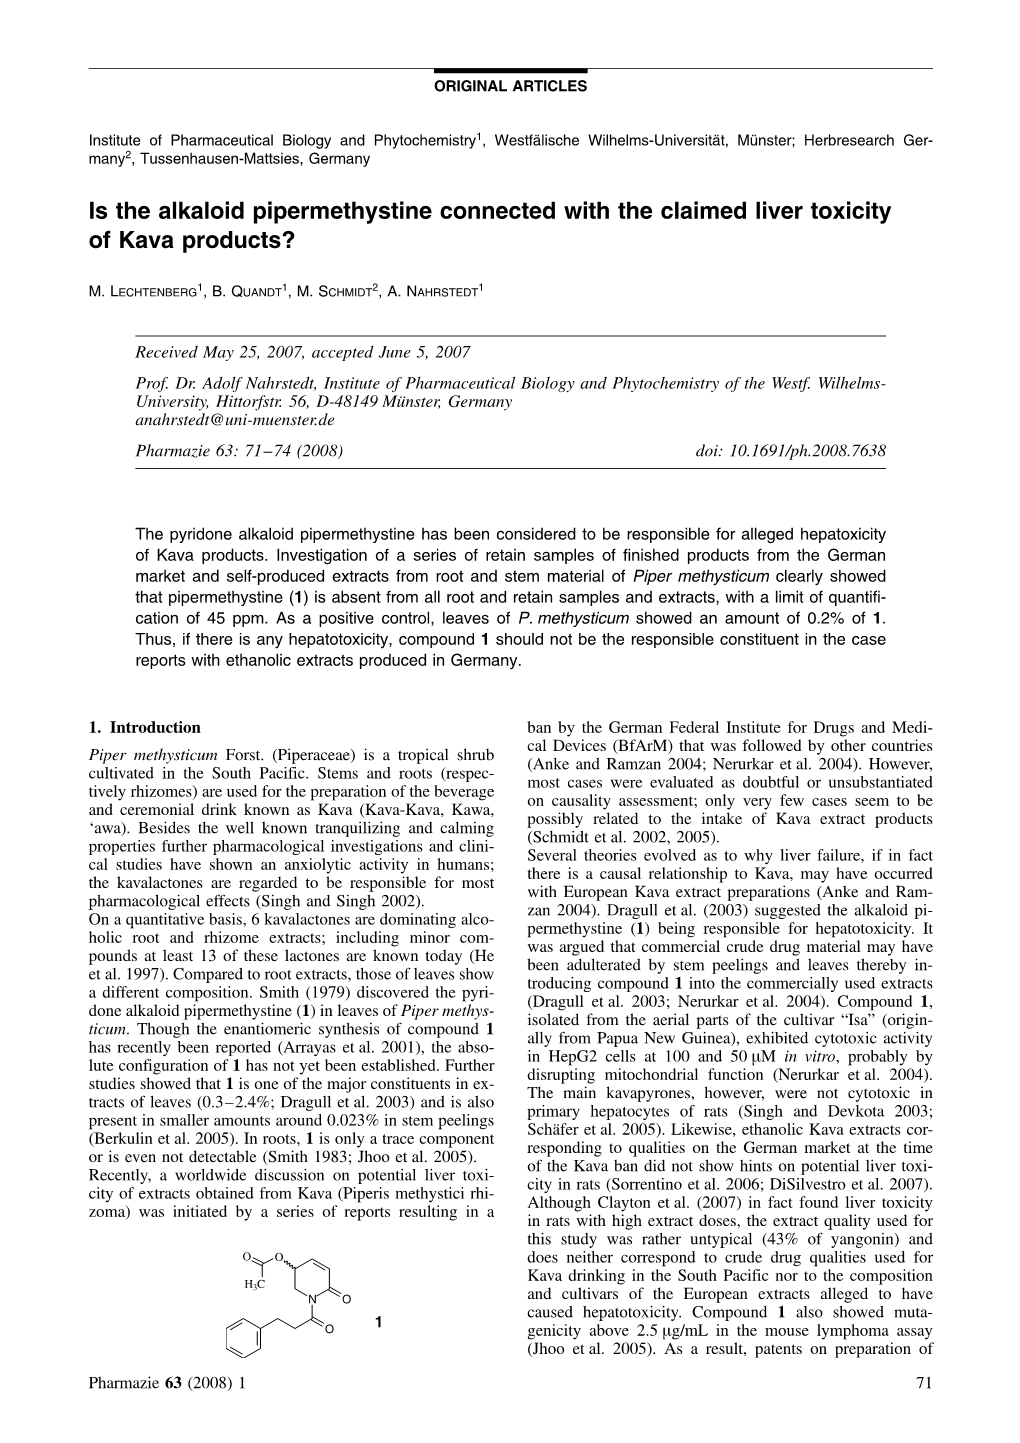 Is the Alkaloid Pipermethystine Connected with the Claimed Liver Toxicity of Kava Products?